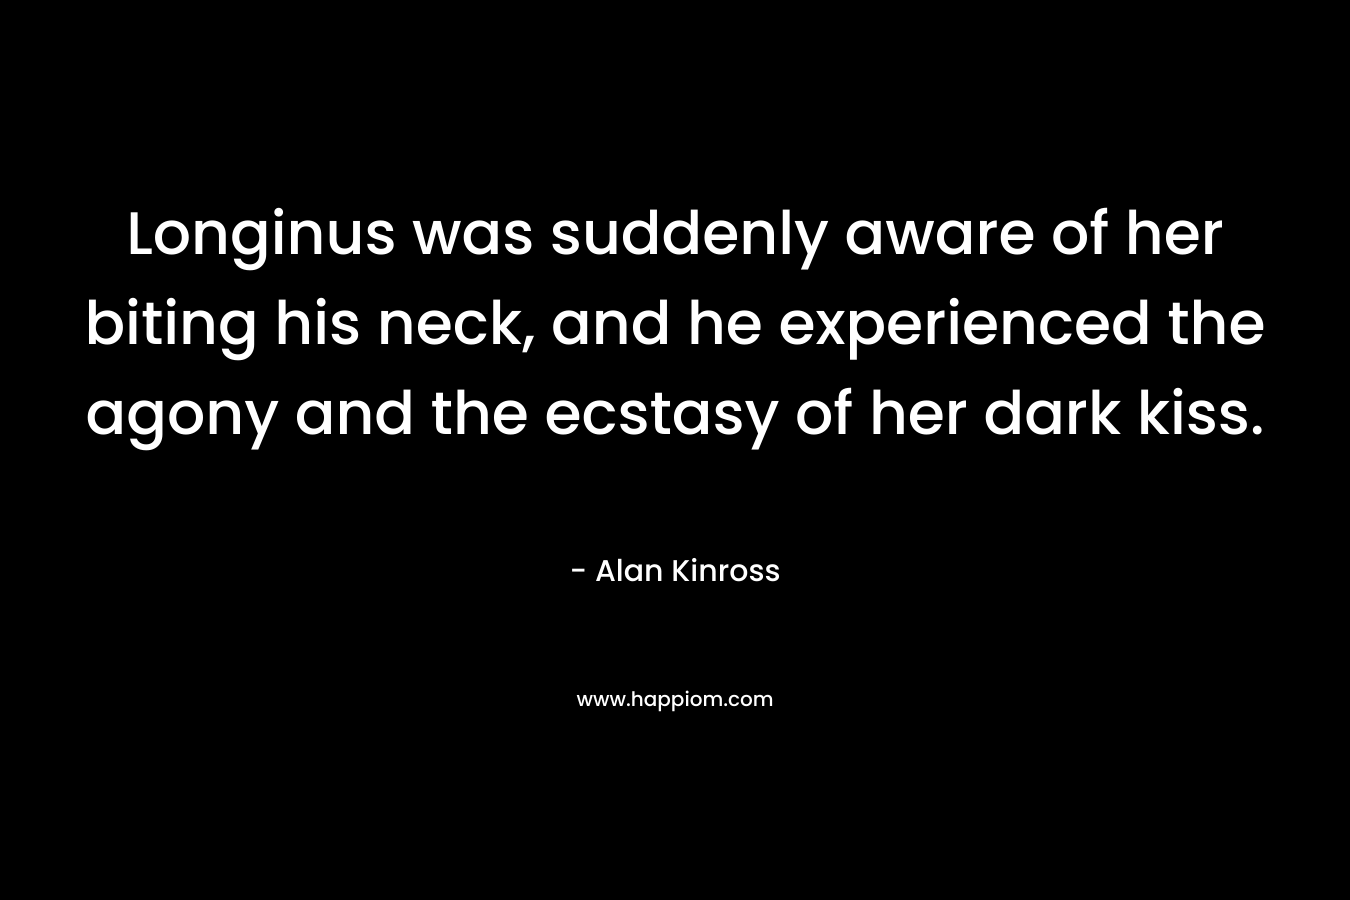 Longinus was suddenly aware of her biting his neck, and he experienced the agony and the ecstasy of her dark kiss. – Alan Kinross